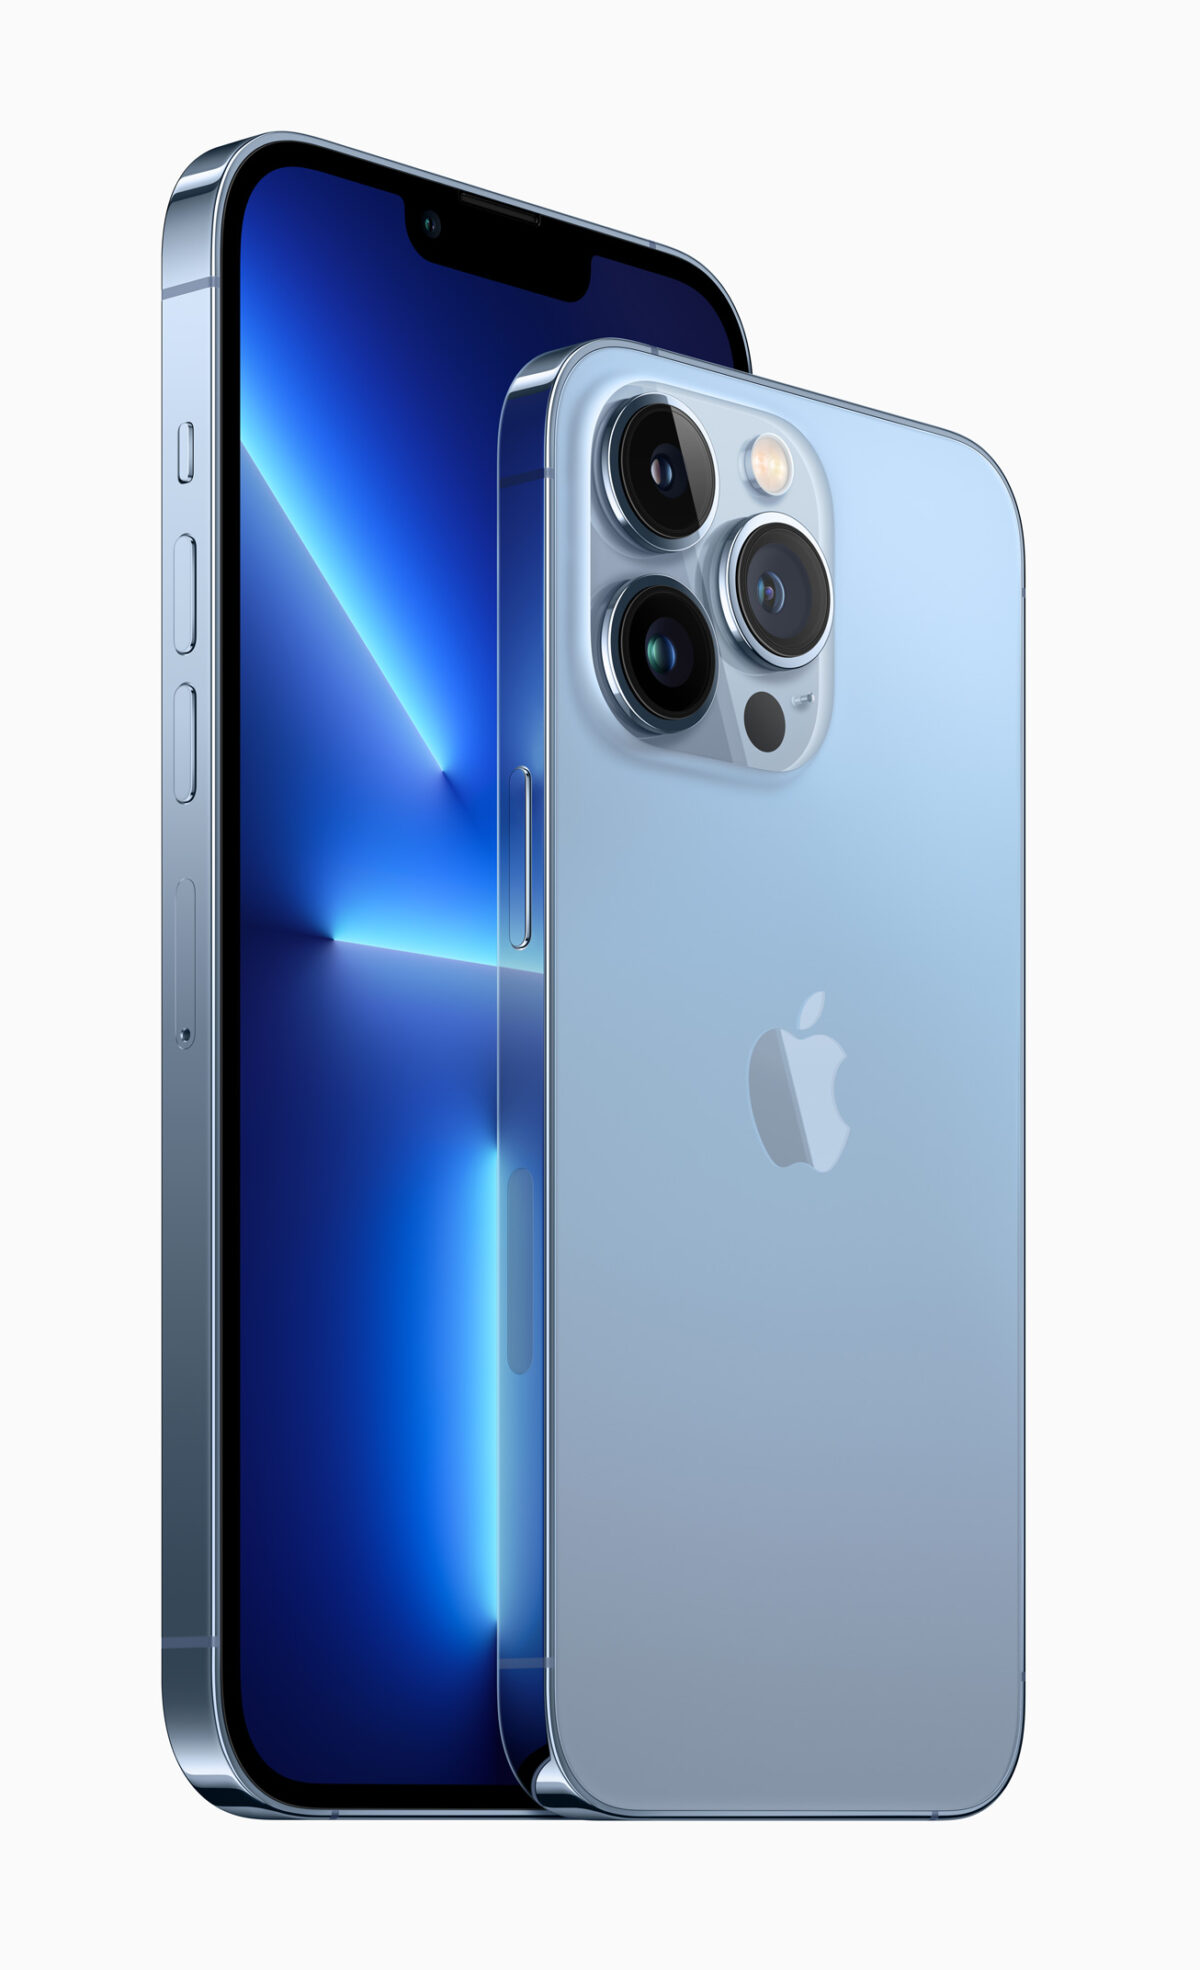 The iPhone 13 Pro features a Pro Motion display, new camera system ...